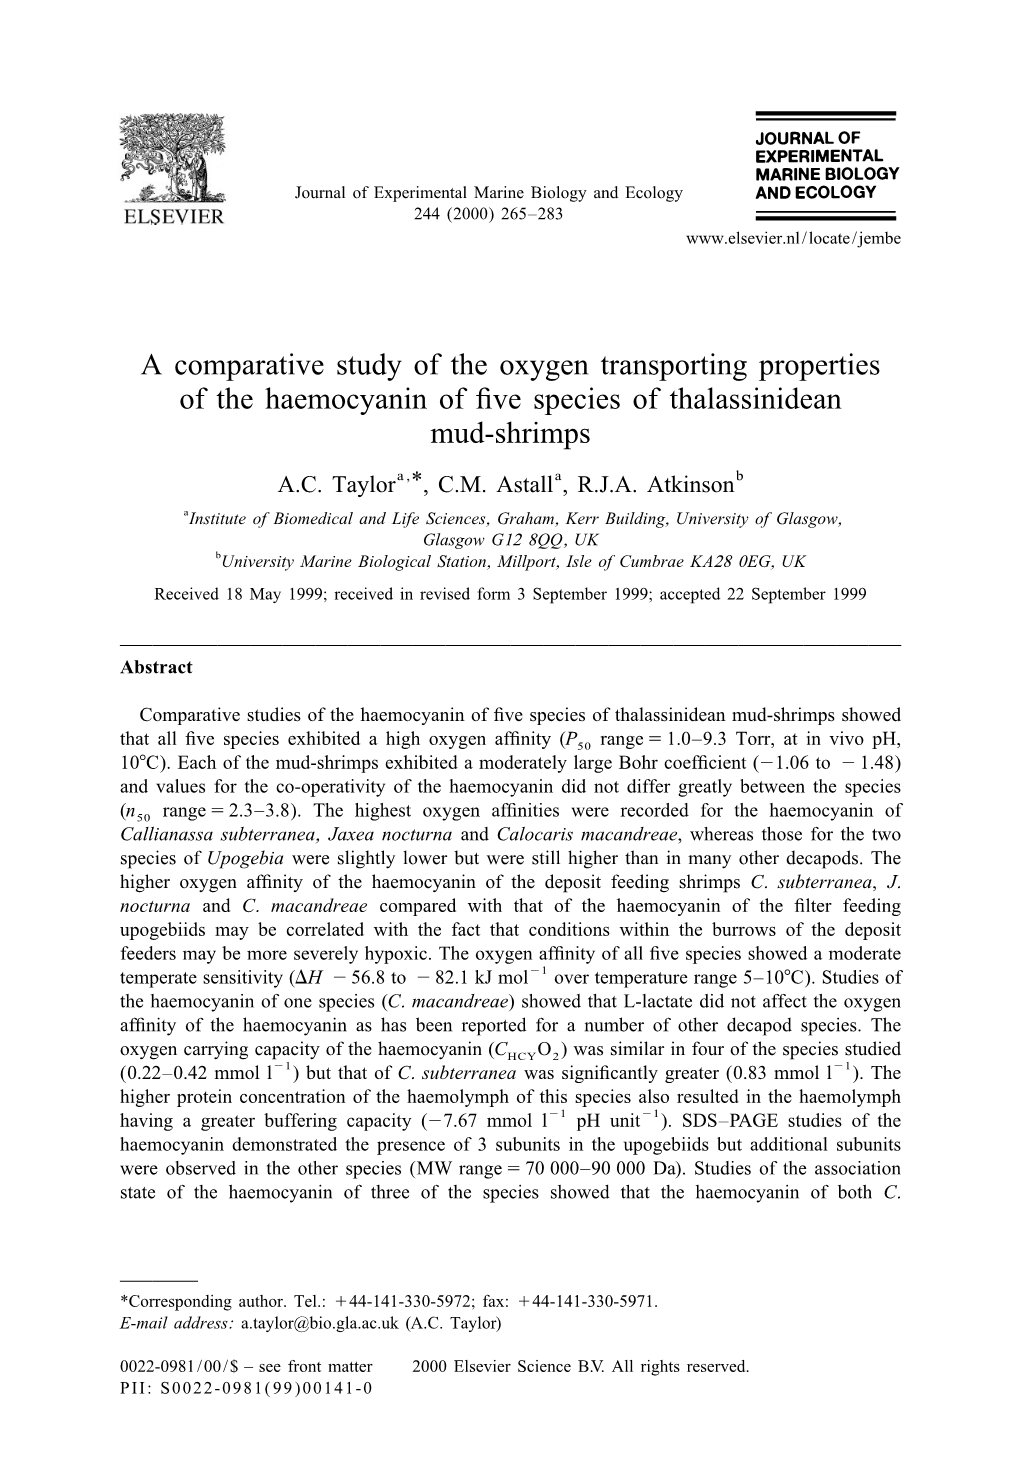 A Comparative Study of the Oxygen Transporting Properties of the Haemocyanin of ®Ve Species of Thalassinidean Mud-Shrimps